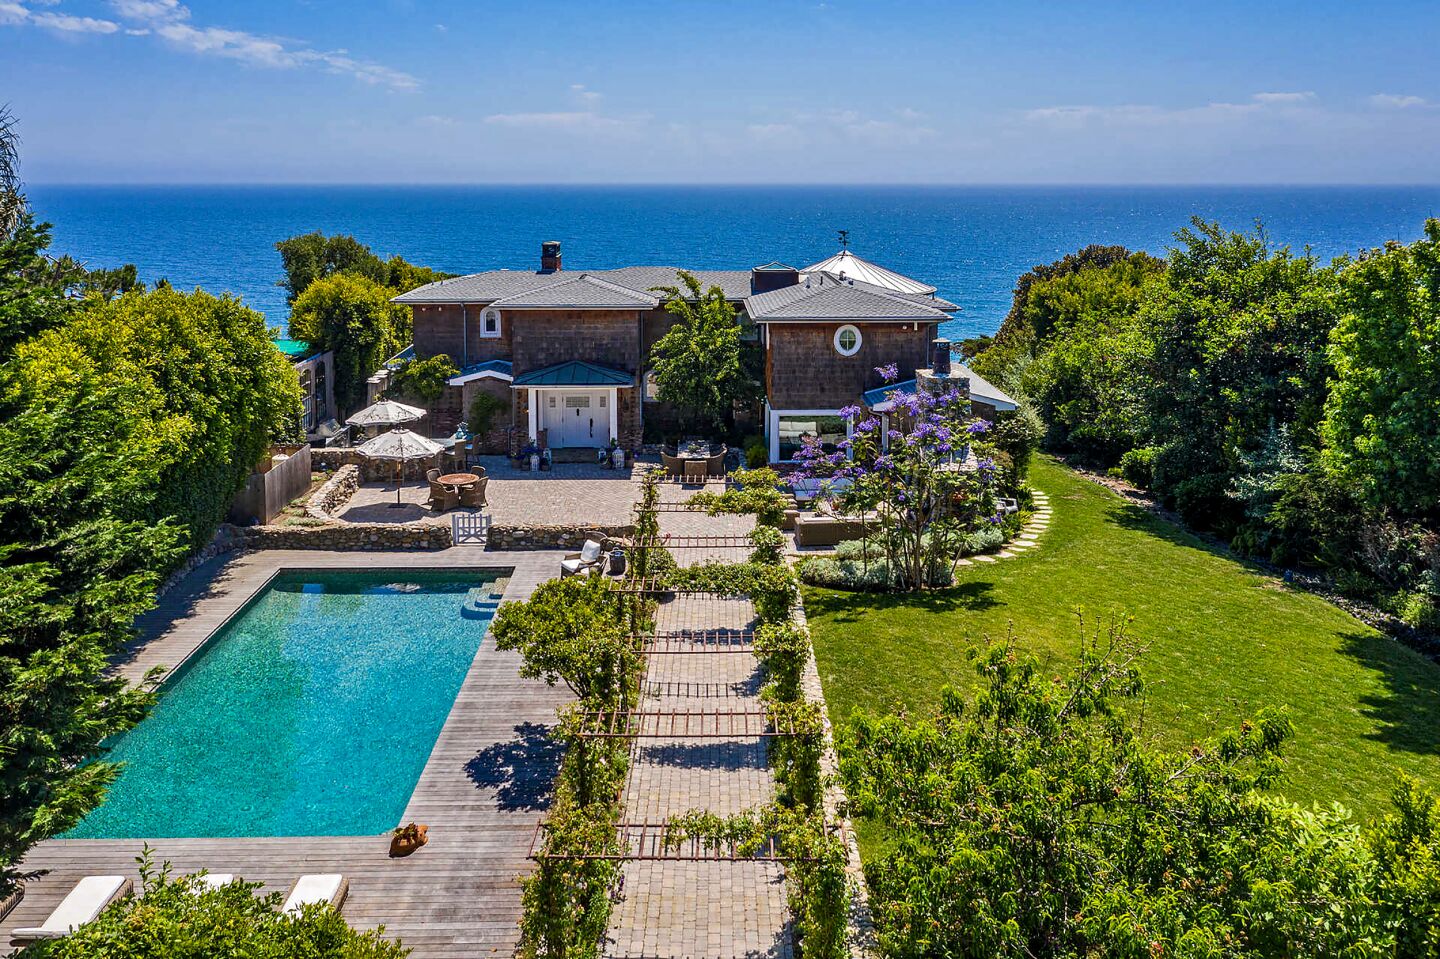 This coastal Cape Cod overlooks the ocean from a bluff in Point Dume, descending to a stretch of private beach.